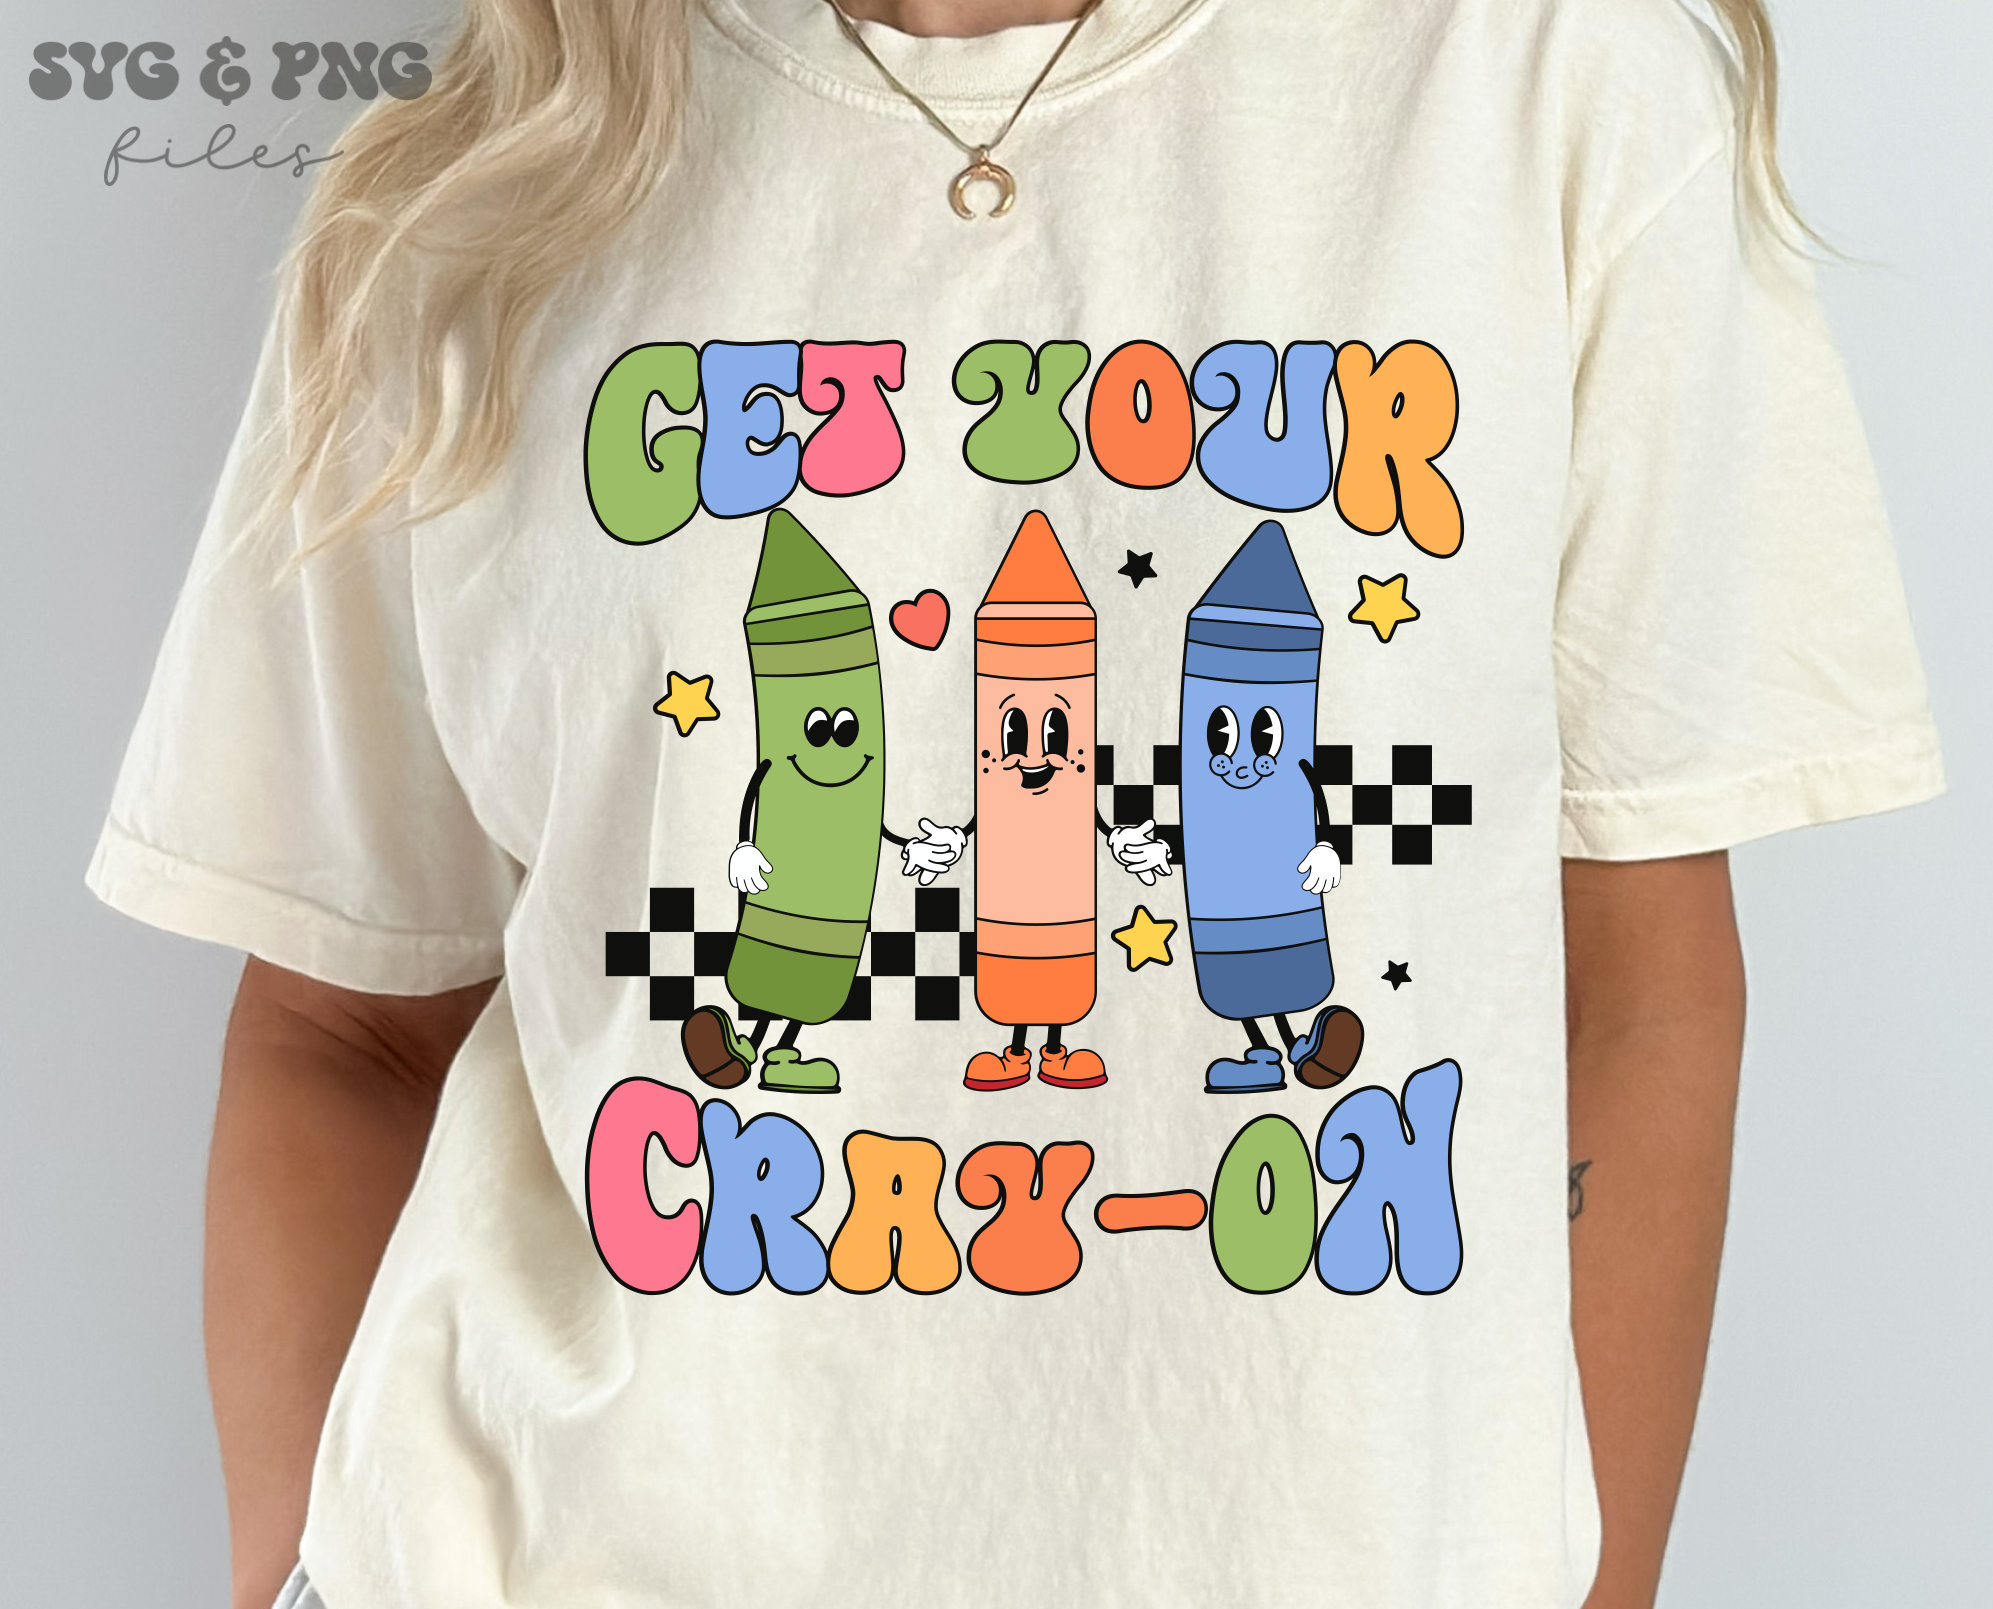 Let's Get Cray Cray Funny Grade School Crayon Box Quote Kids T-Shirt for  Sale by CRHPOD20